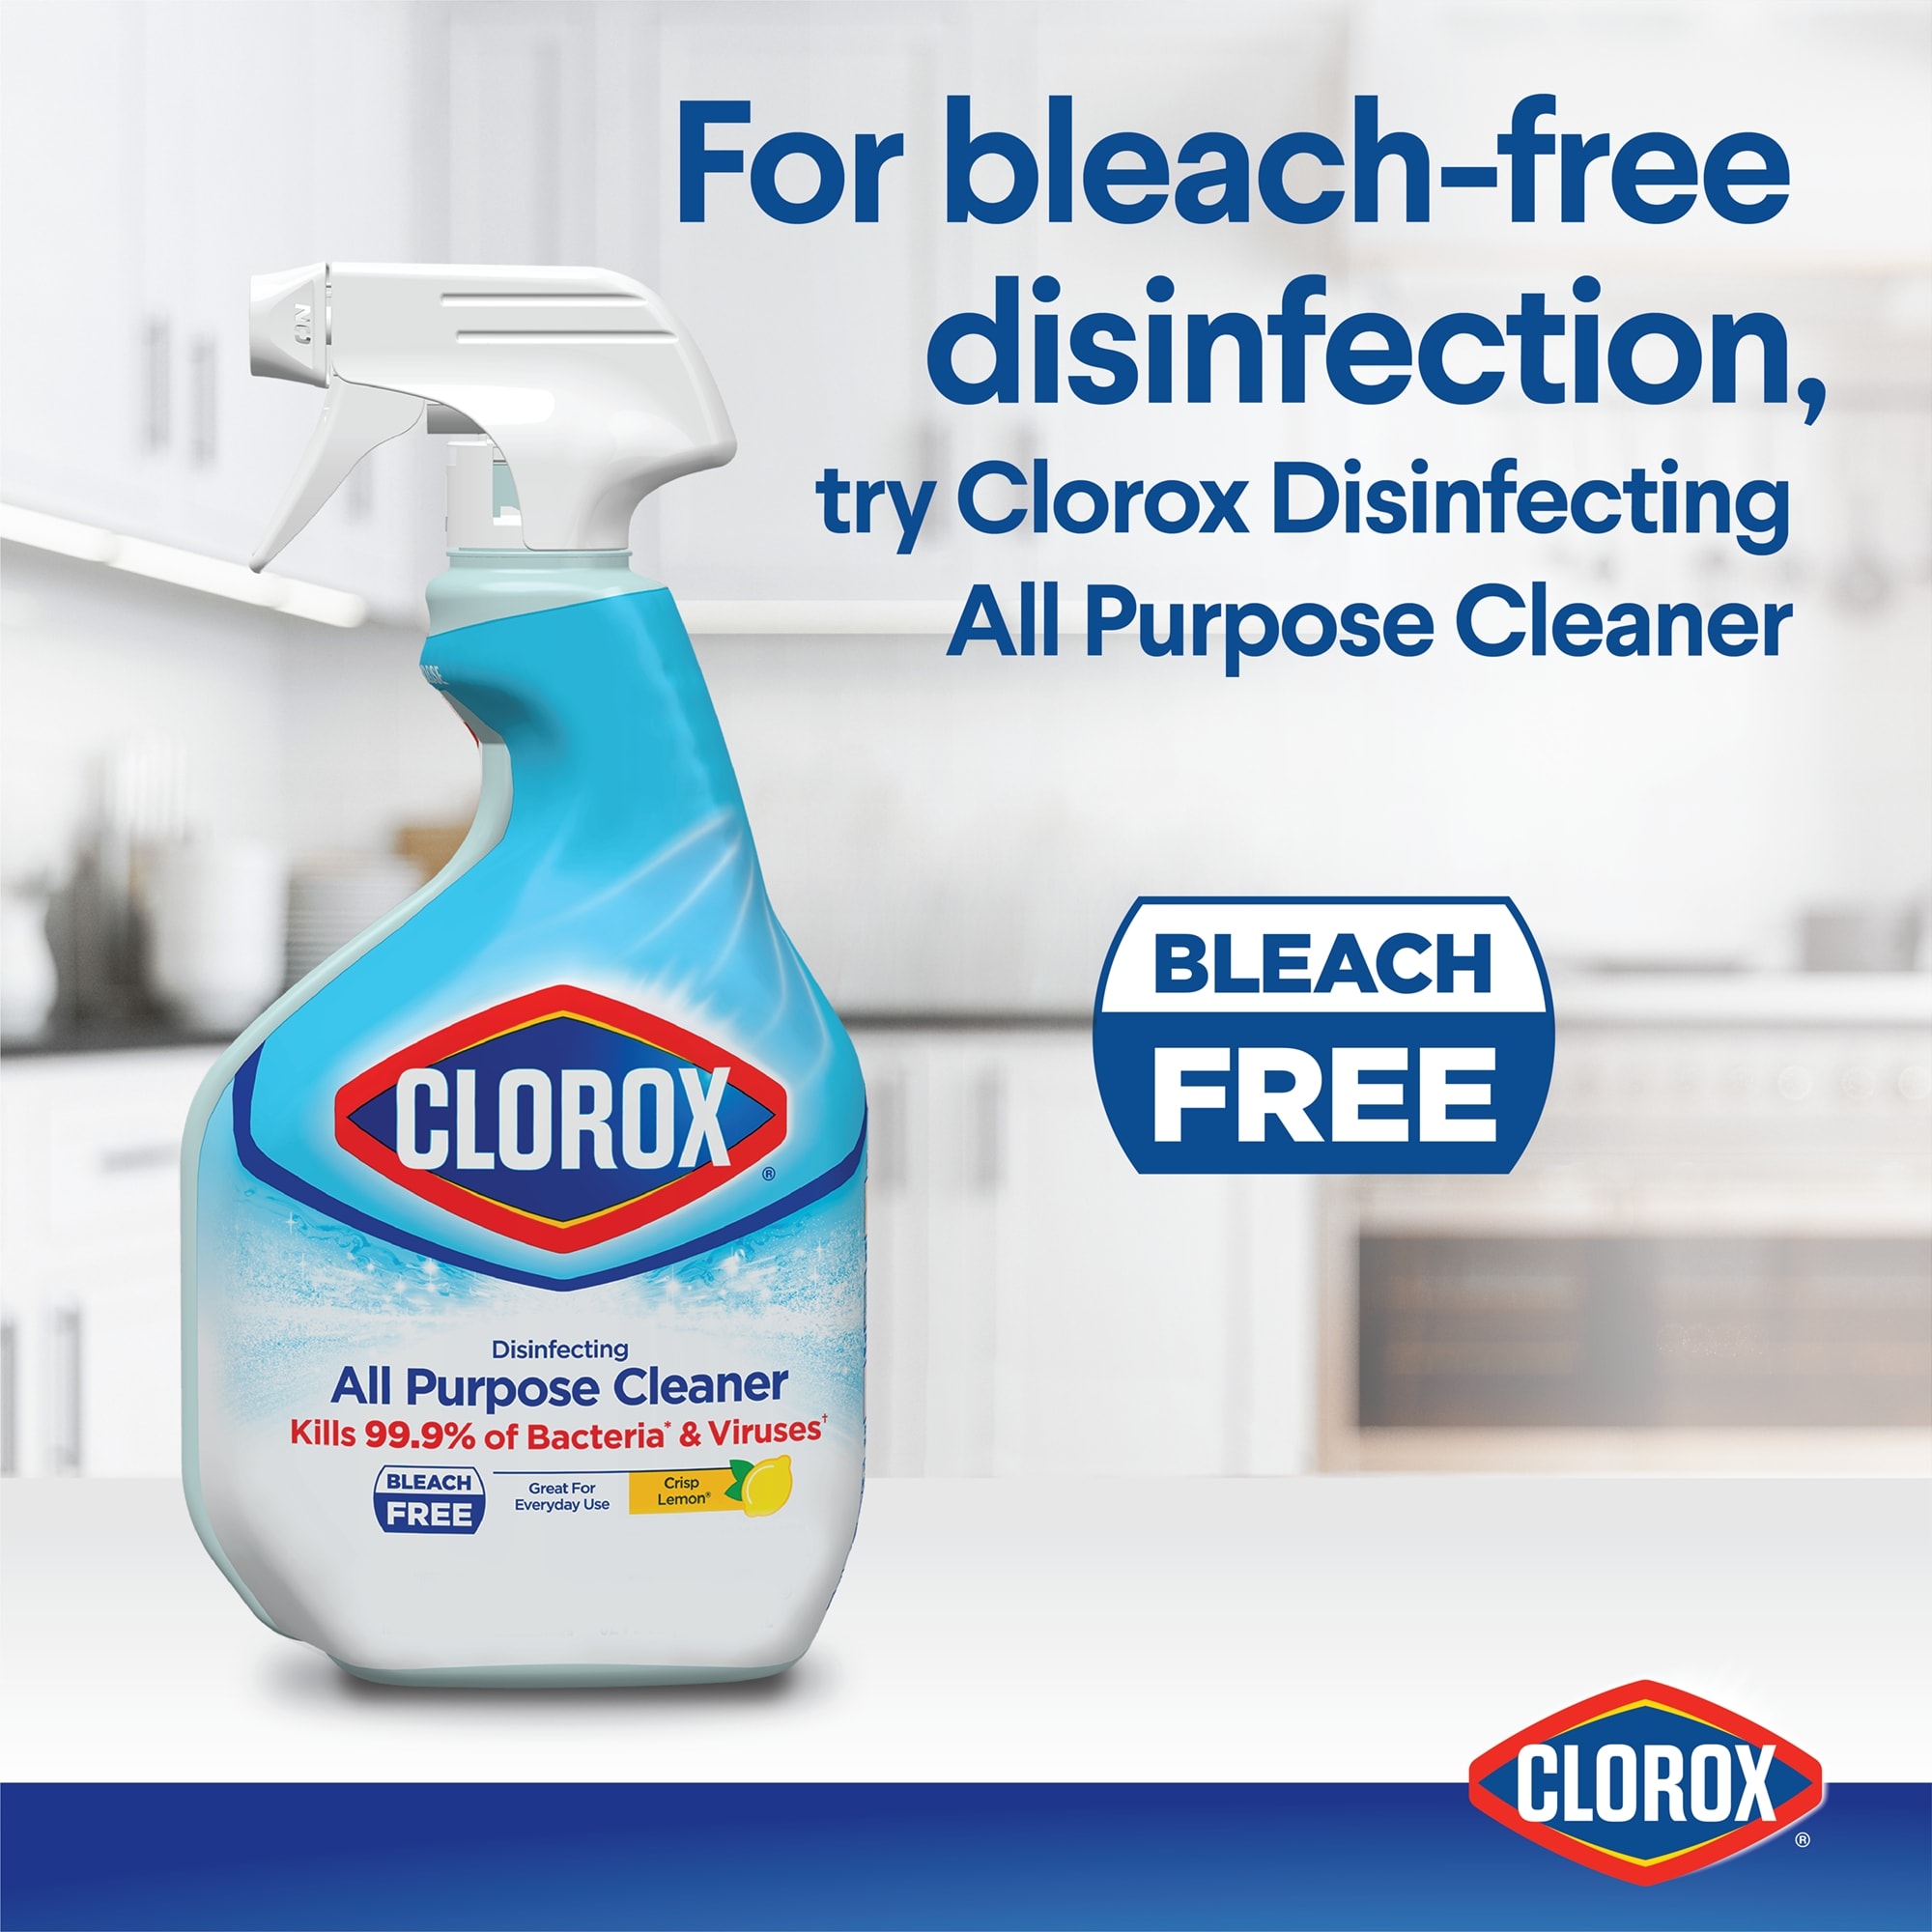 Clorox Clean-Up All Purpose Cleaner Spray Bottle with Bleach